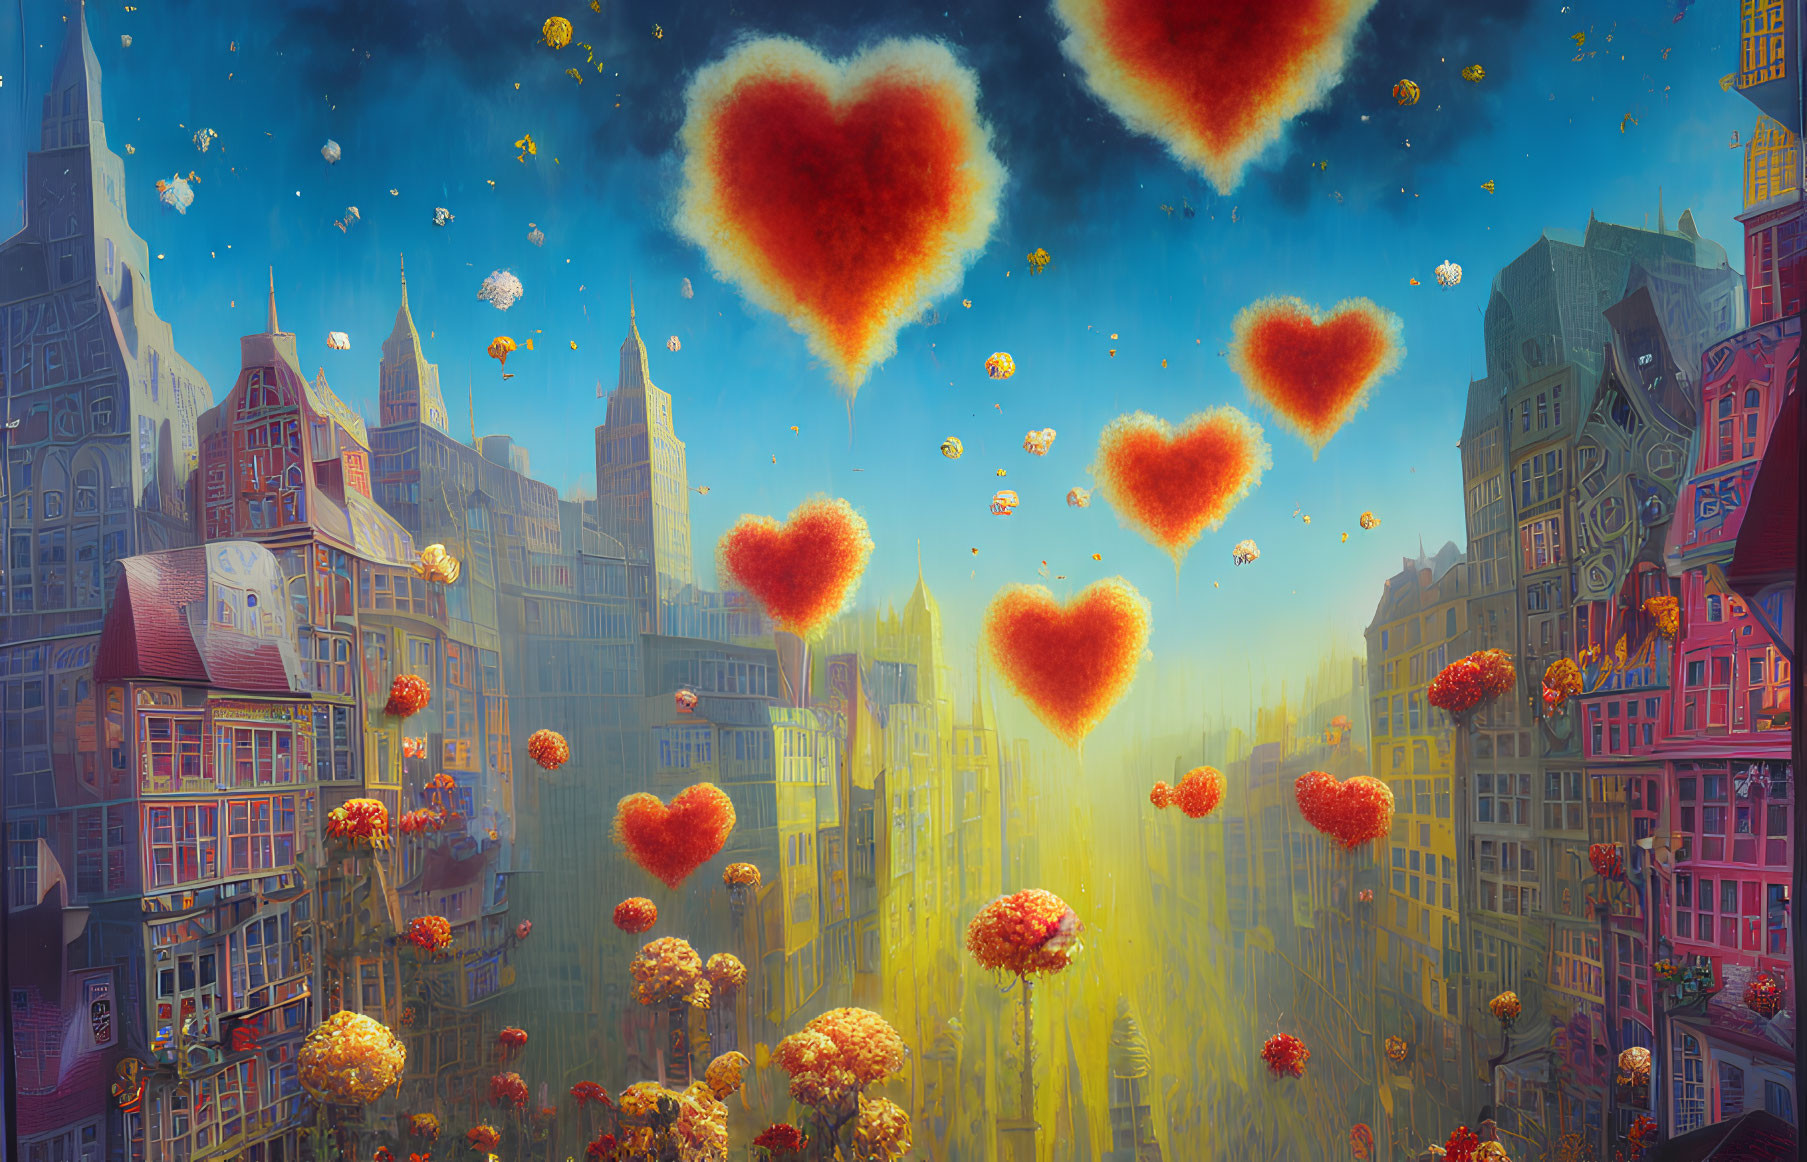 Whimsical cityscape with heart-shaped islands and glowing particles